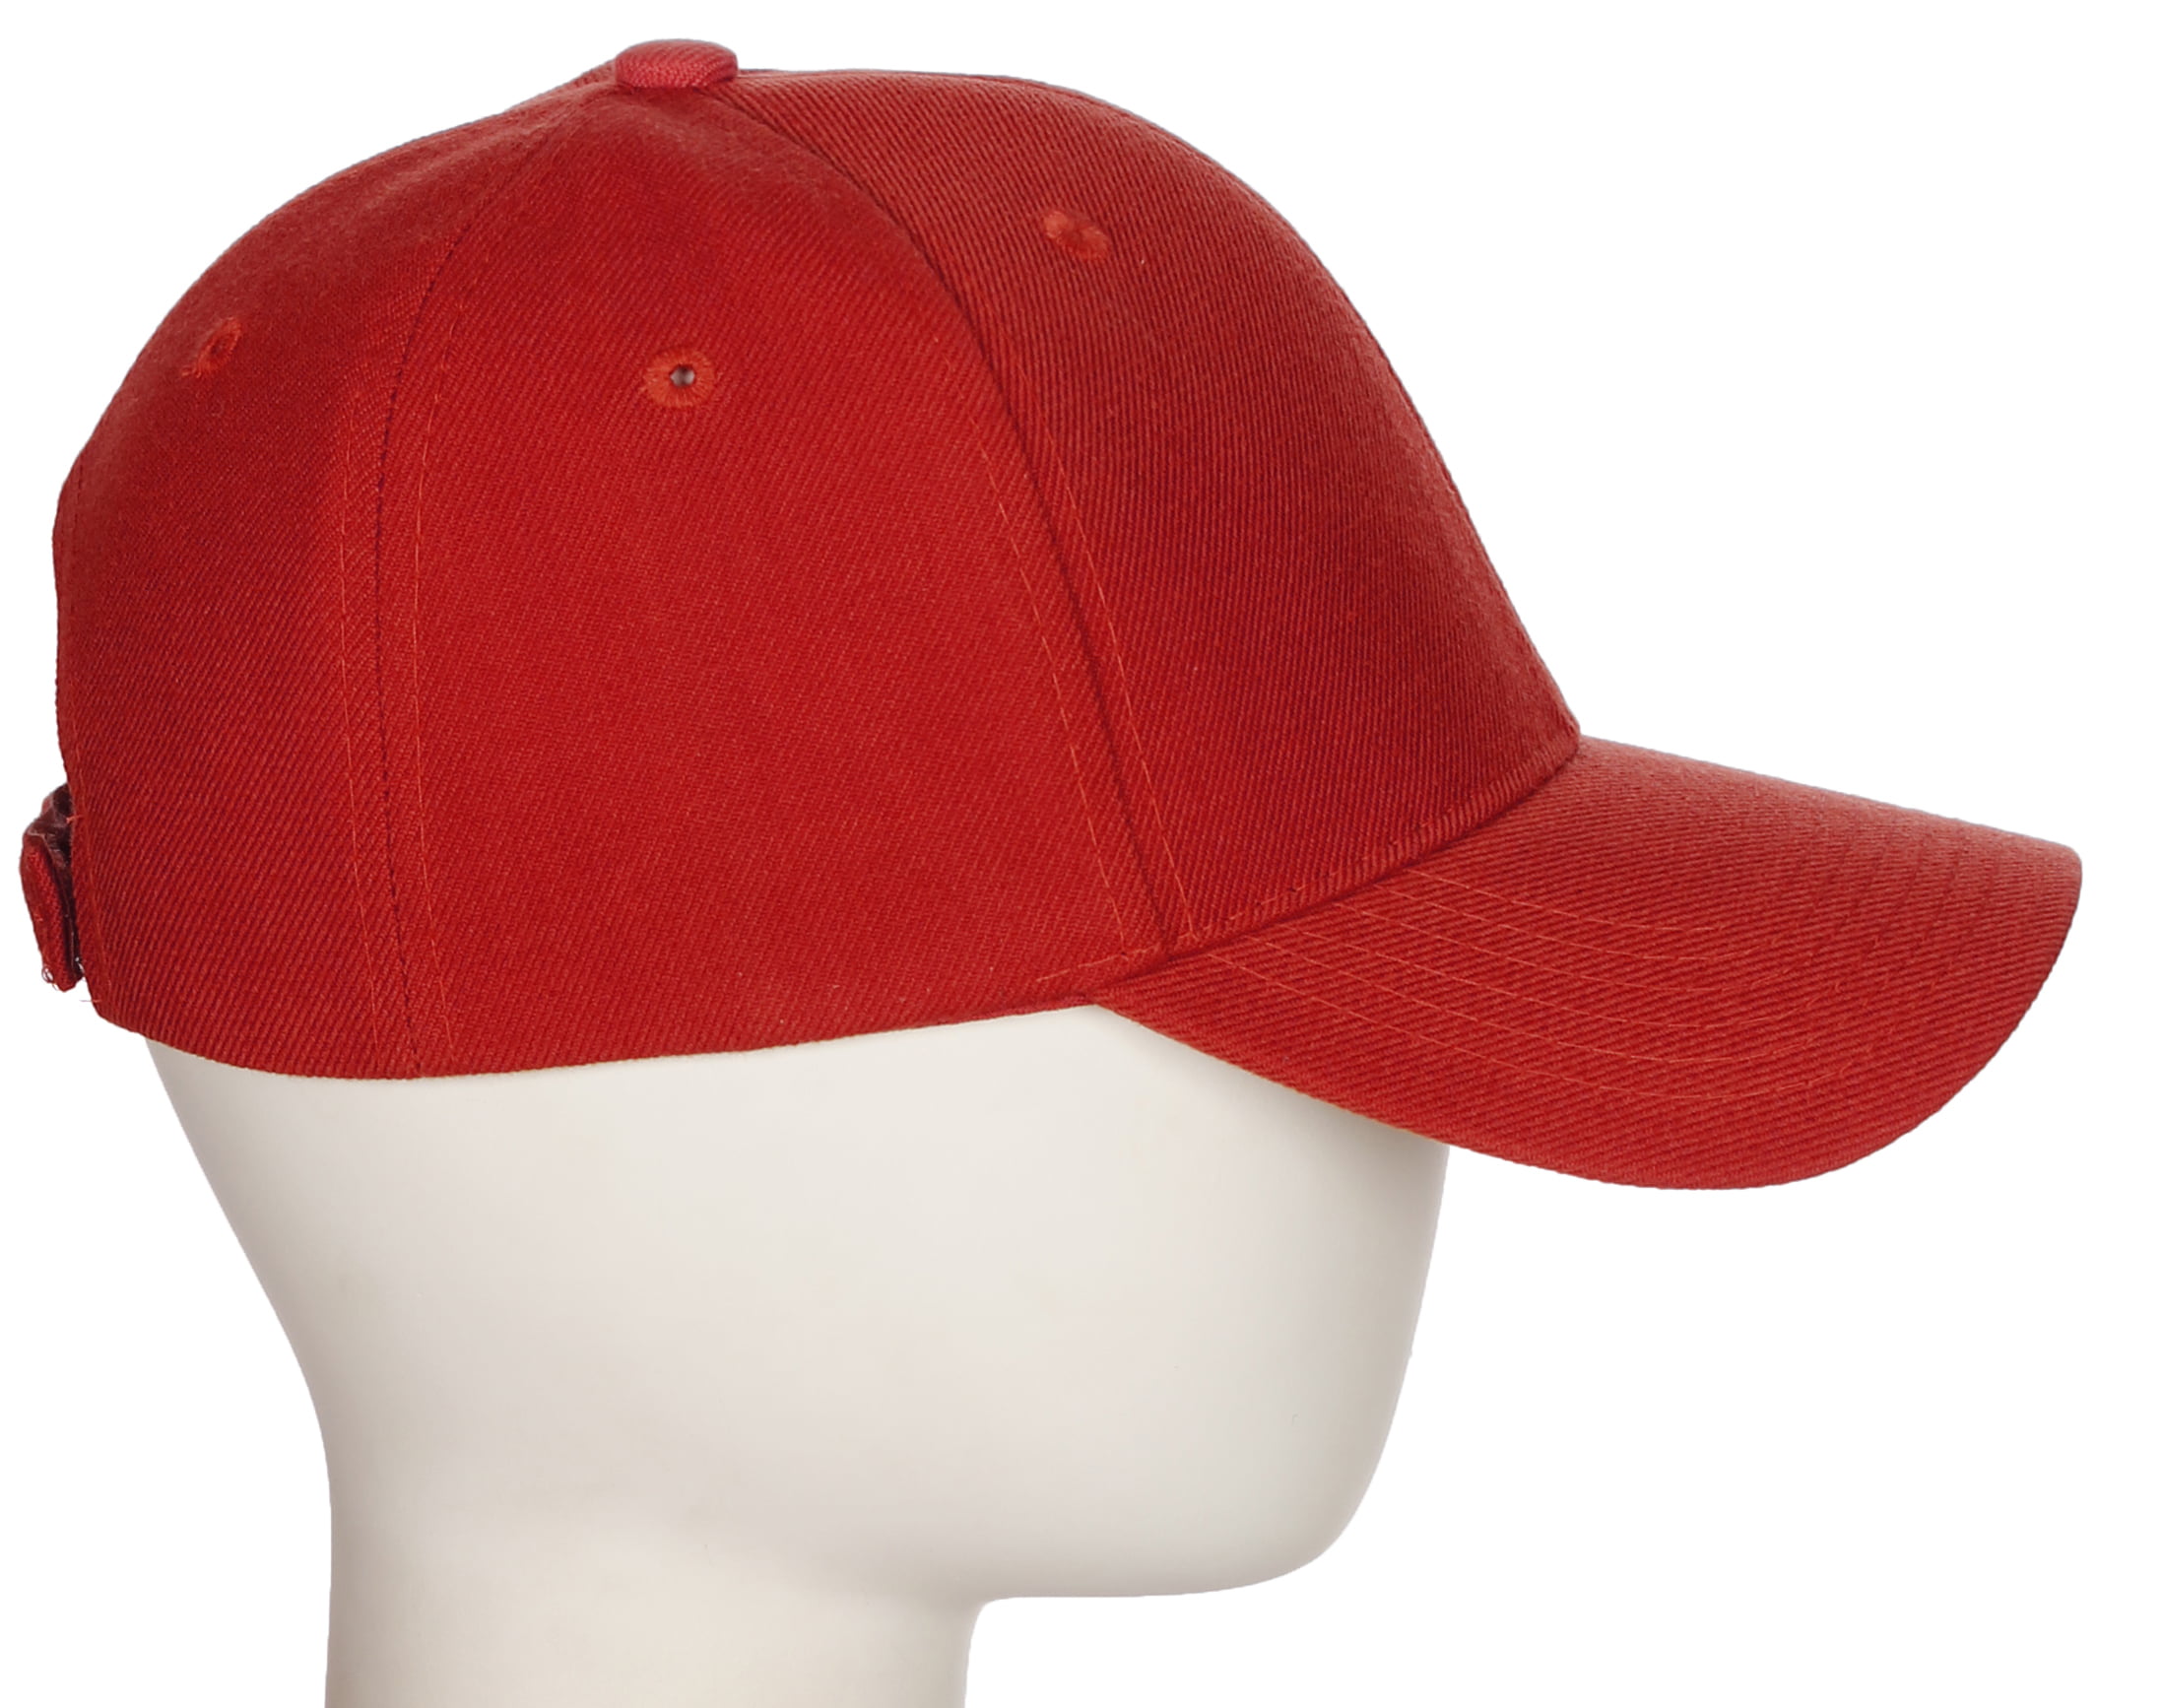 Hat Black Classic Hat Cap White A Baseball Initial 3D Z P to Raised Letter Structured Adjustable, Letters Red